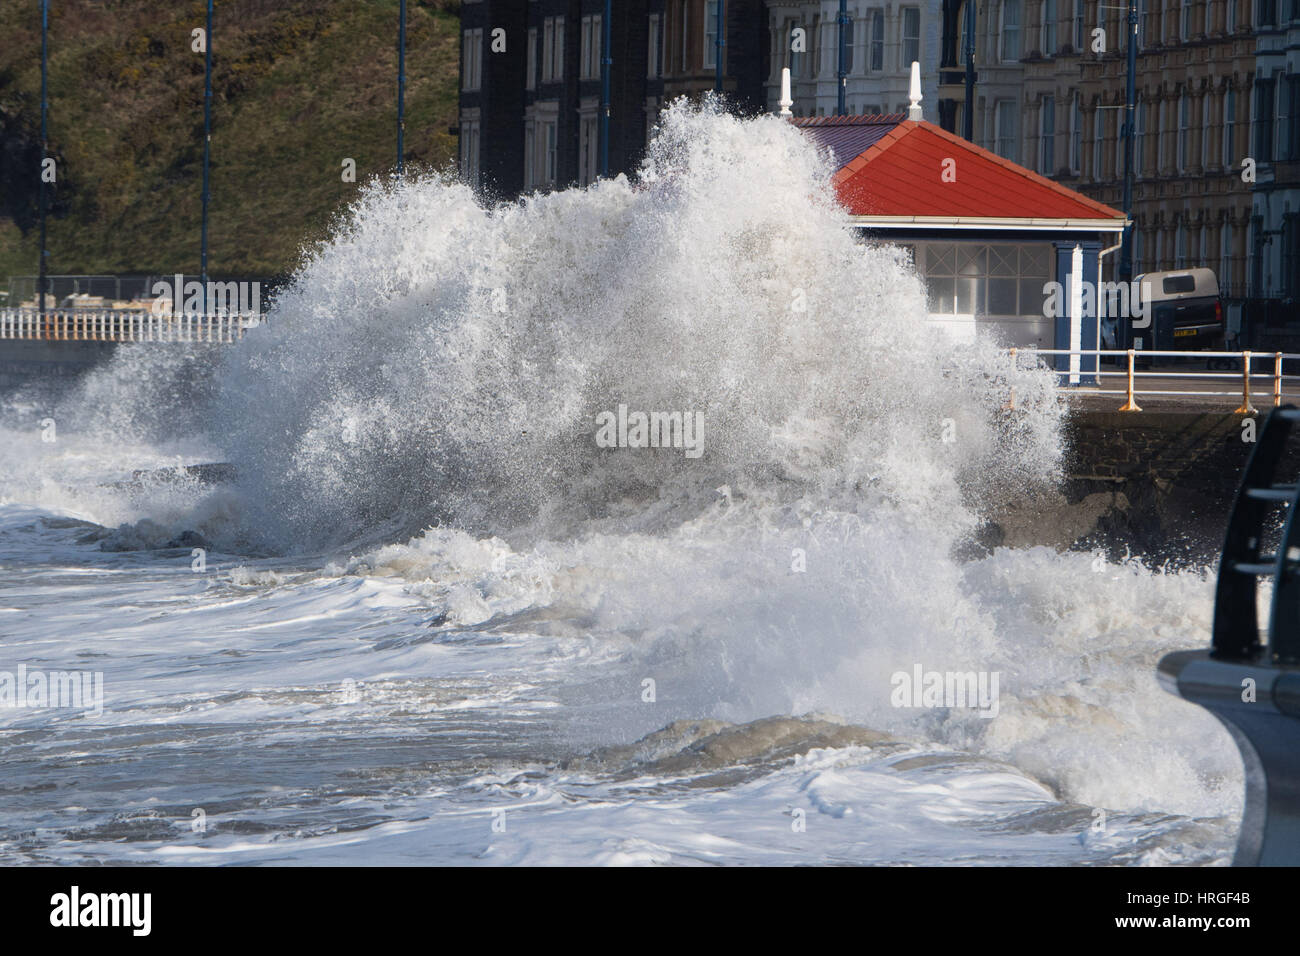 Aberystwyth, Wales, UK. 2nd March 2017.  UK Weather: After a night of gale force winds, thunderstorms and hailstones,  the morning’s 5.4m high spring tide bring mountainous high waves to batter the promenade and sea defences in Aberystwyth  on the Cardigan Bay coast of West Wales    Credit: keith morris/Alamy Live News Stock Photo